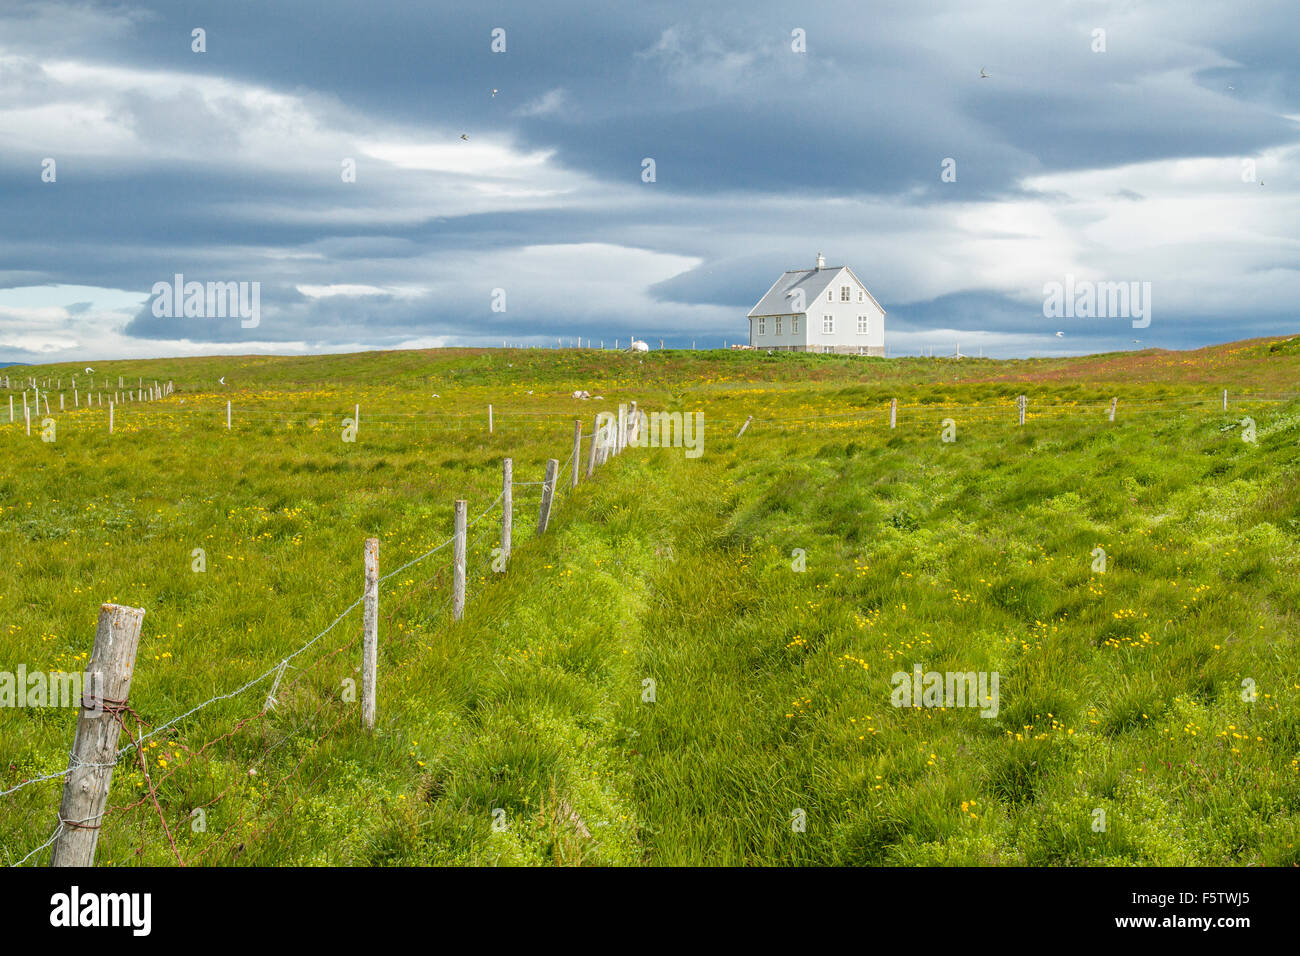 White house on hill, lawn in front, island of Flatey, Westfjords, Iceland Stock Photo